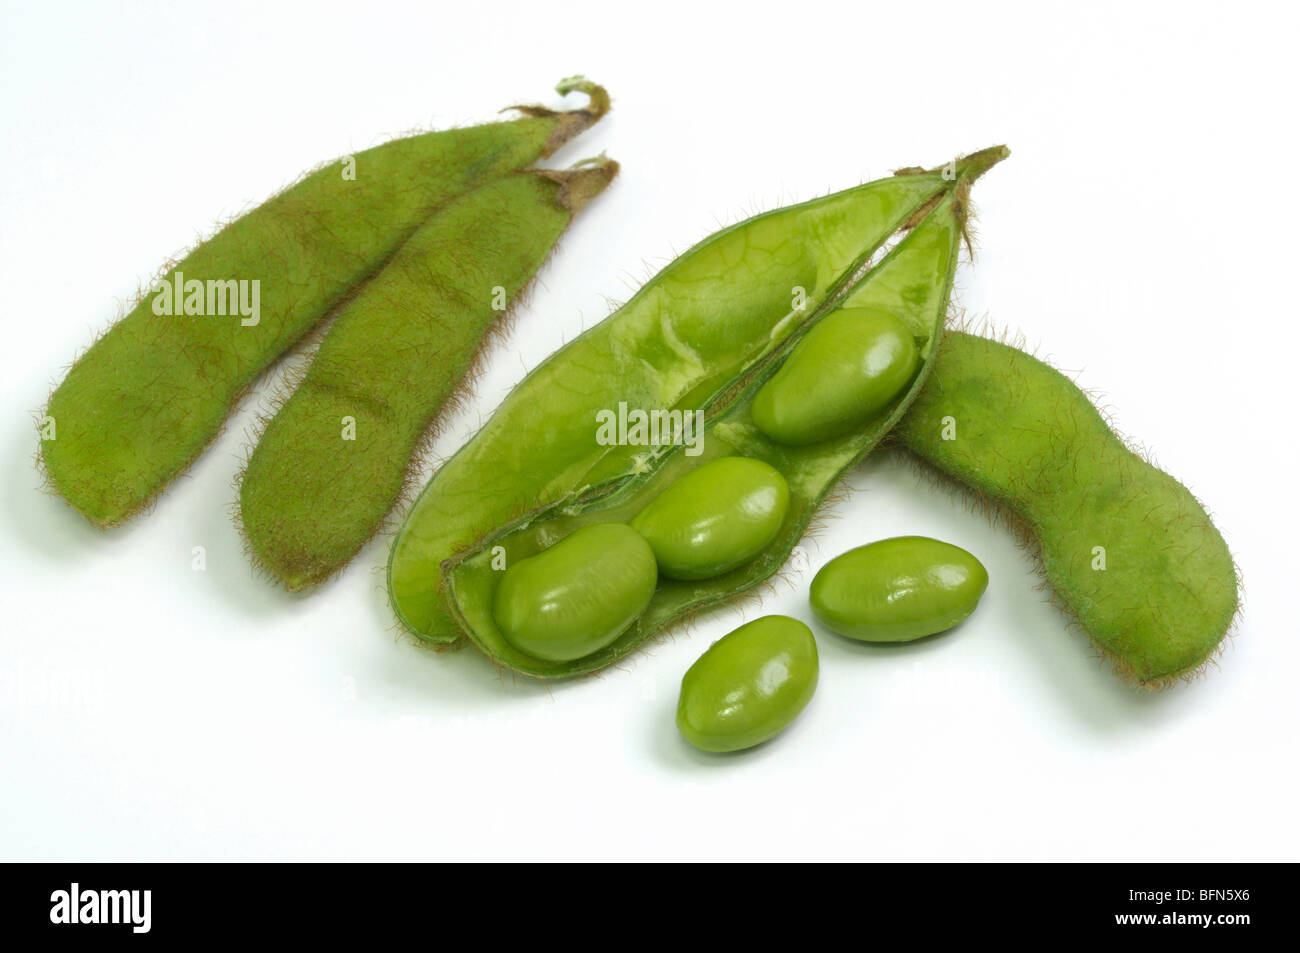 Soya Bean, Soybean (Glycine max). Unripe pods and beans, studio picture. Stock Photo